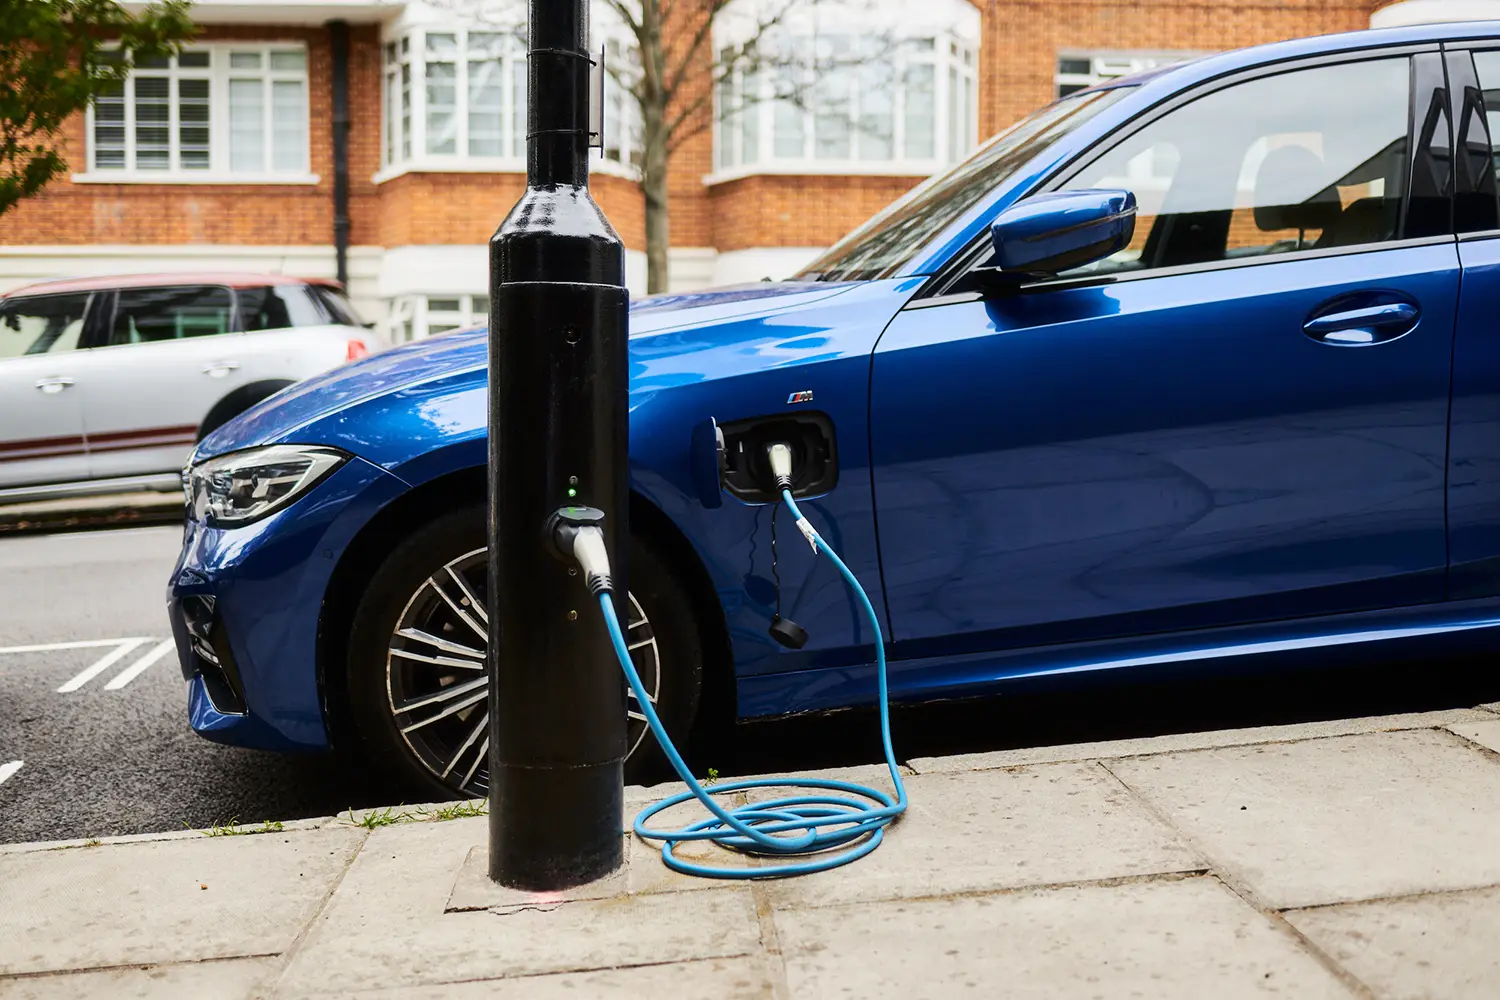 Redbridge Council partners with Siemens and ubitricity to expand Redbridge’s EV Network